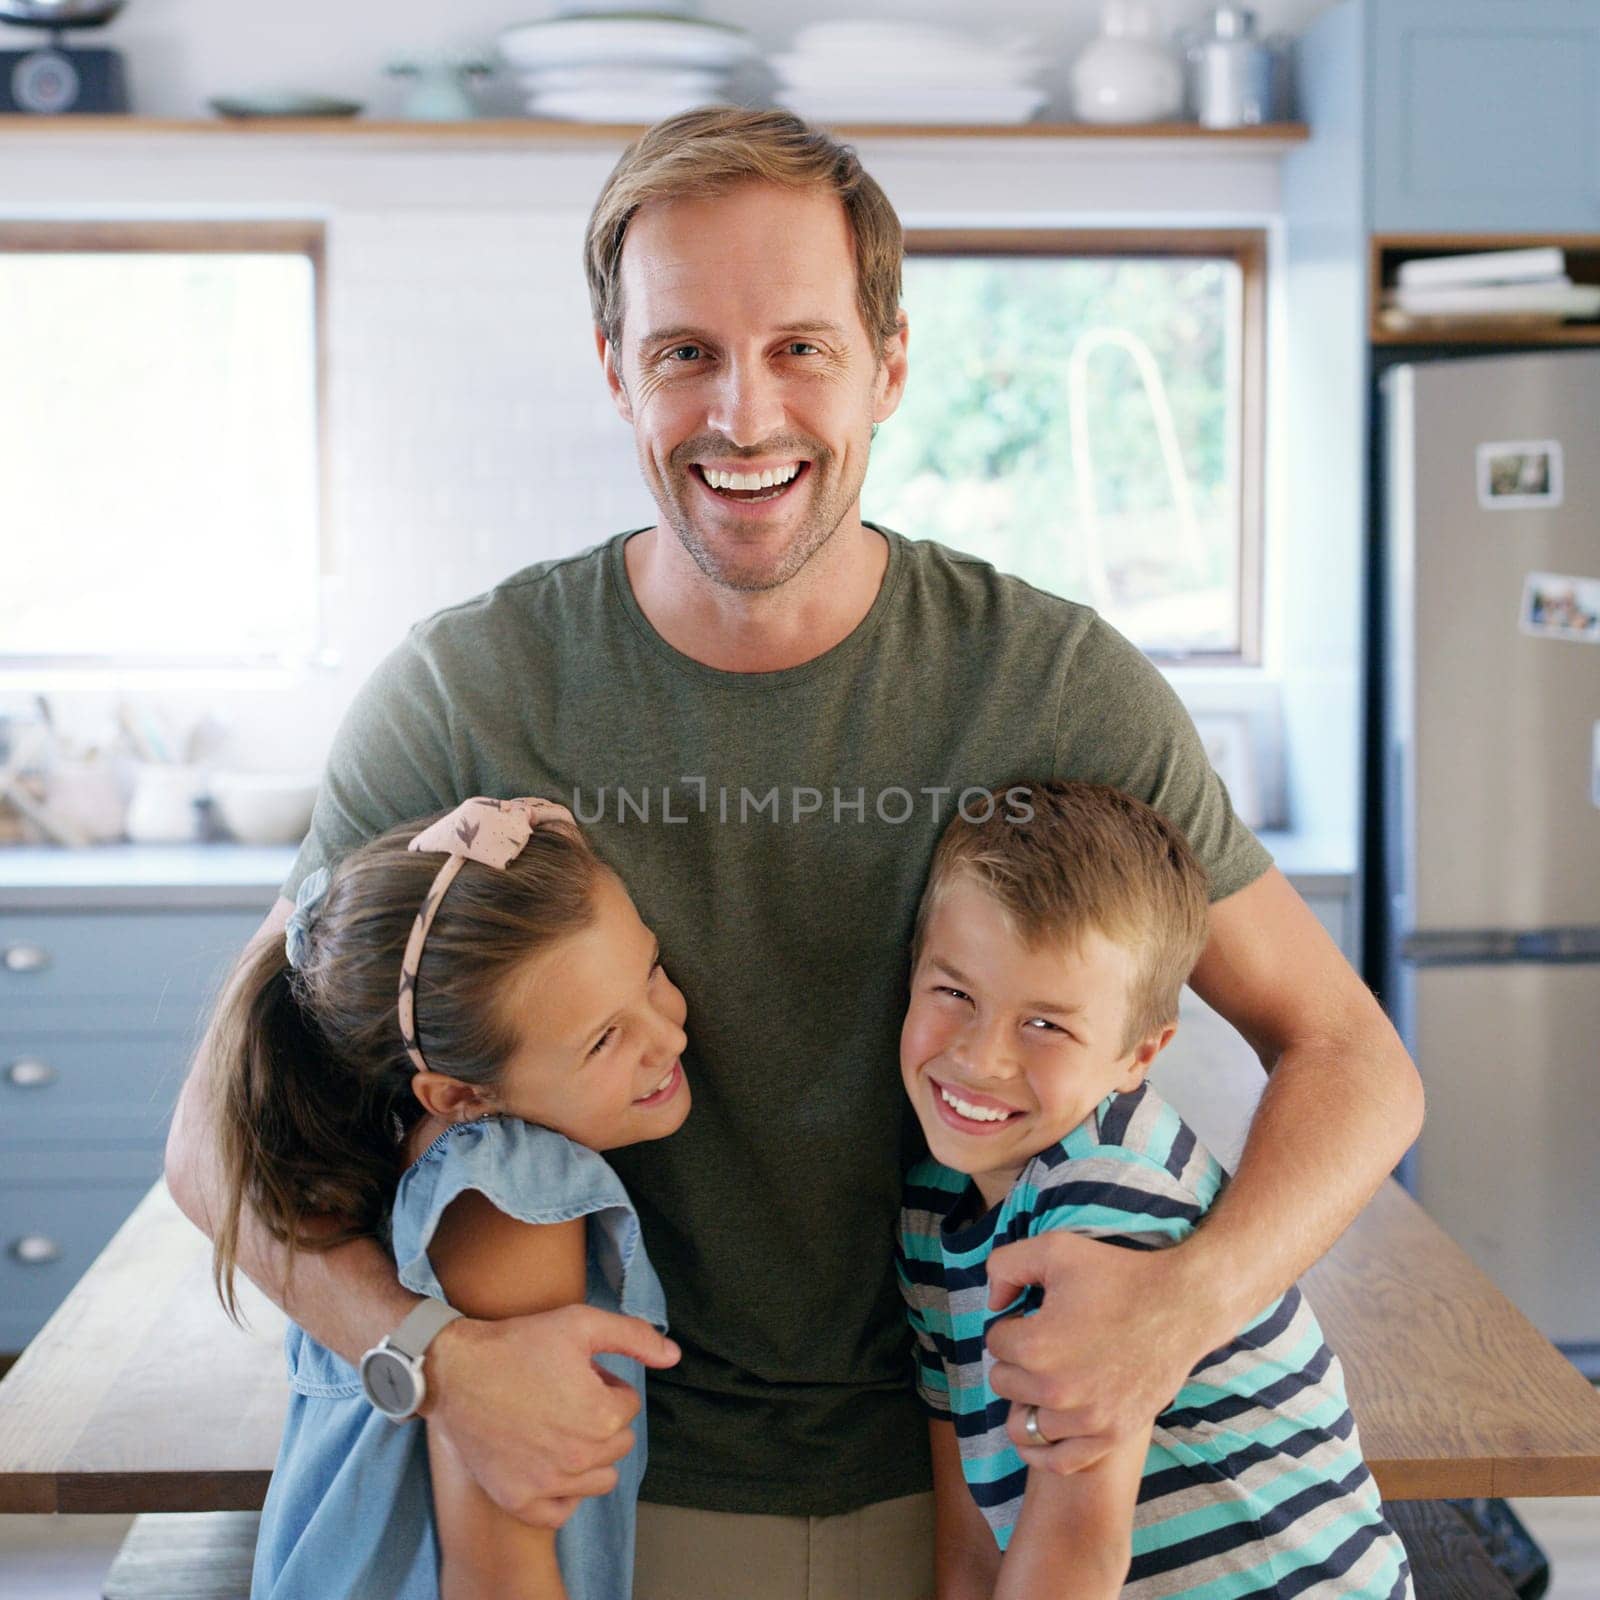 Hes a proud father. an affectionate young father embracing his two kids in their kitchen at home